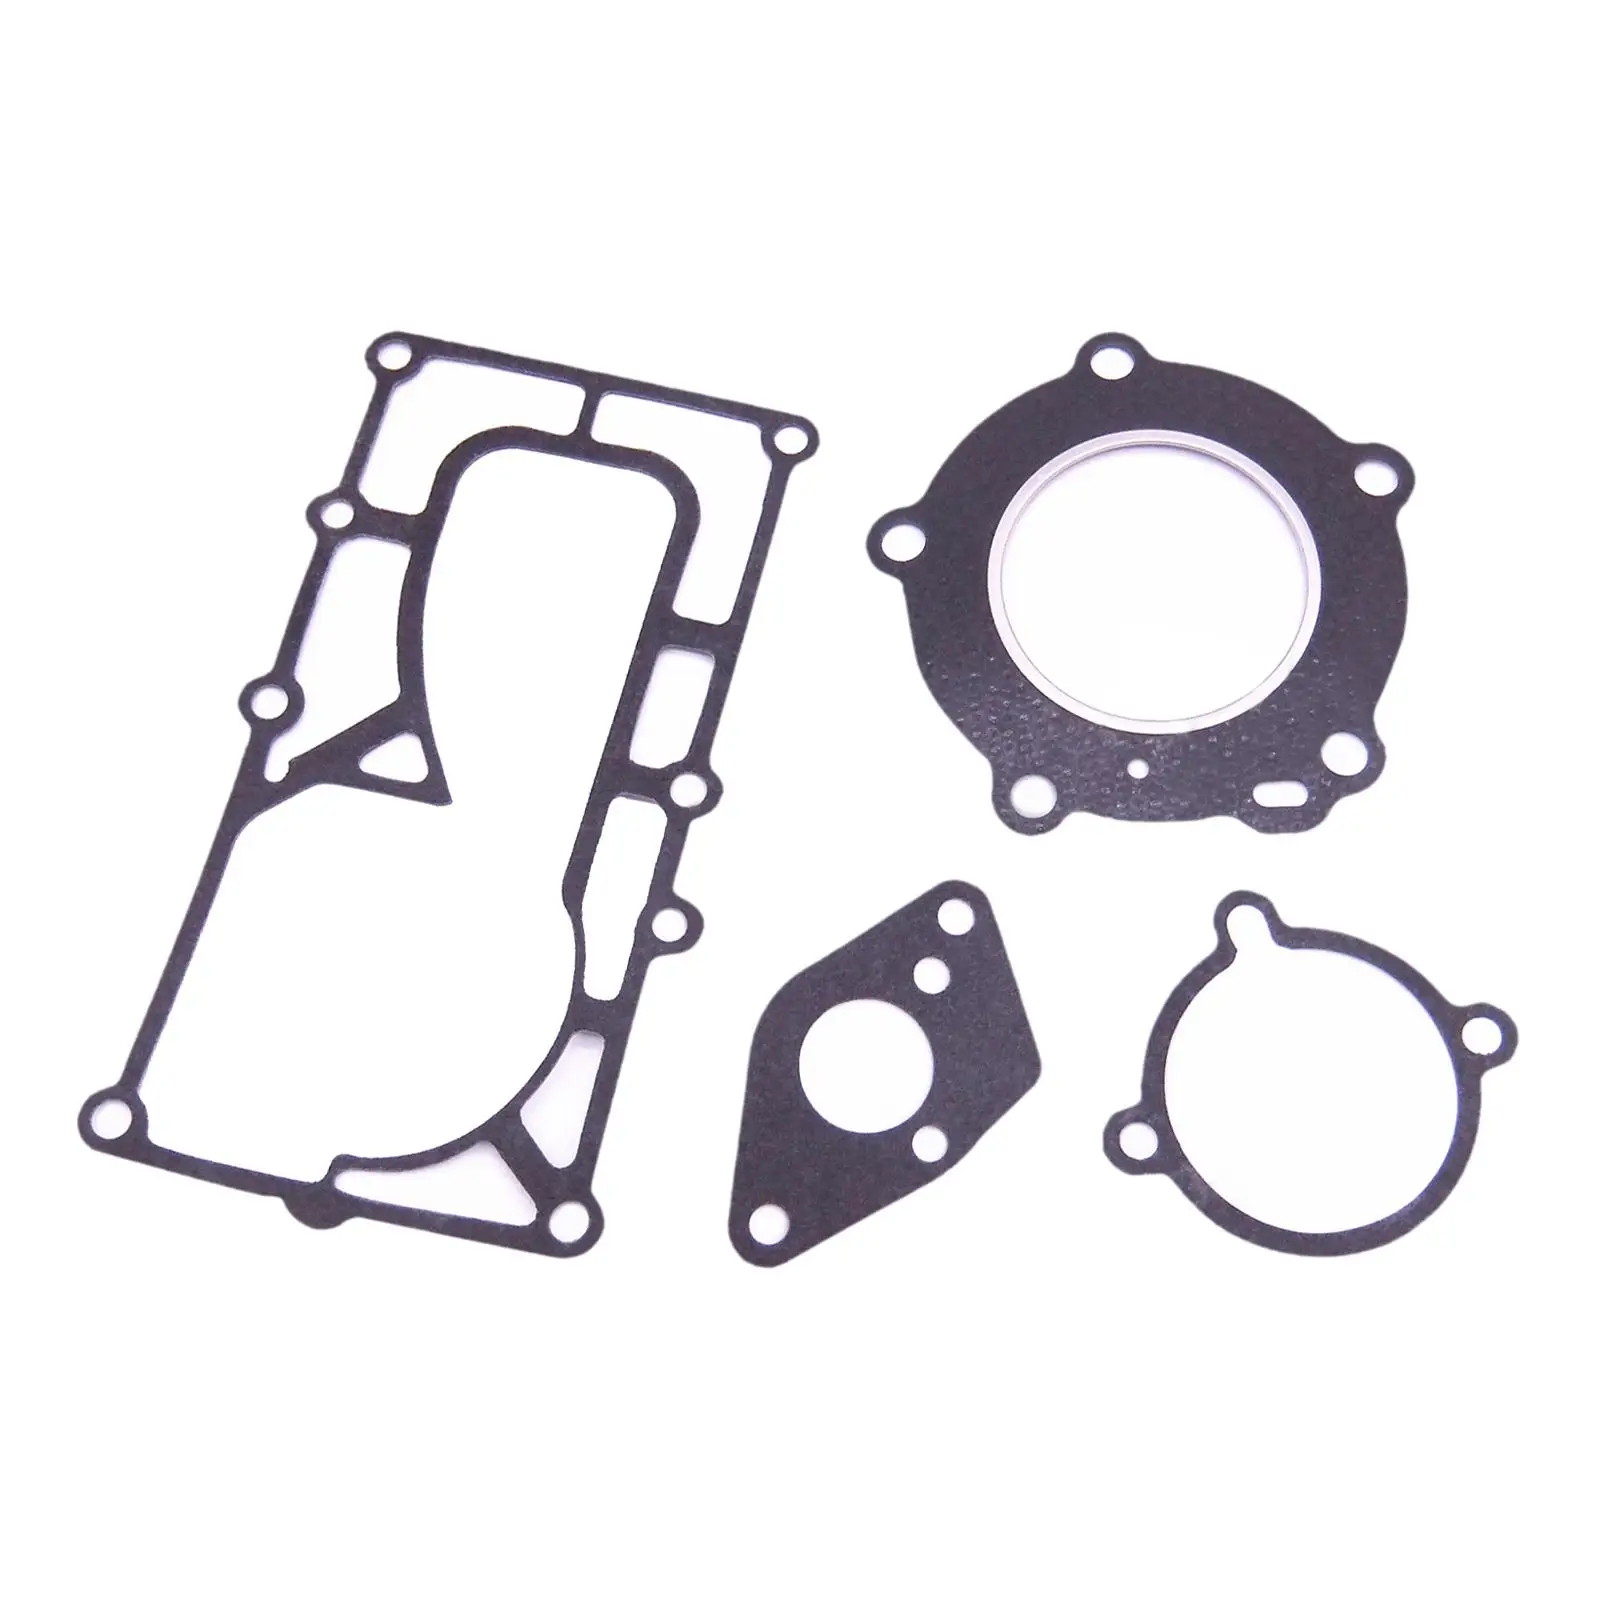 

Seal Gasket Kit 36901-0051M 369-61012-0 369-01005-1 36901-2140M 36961-0120M Boat Motor Fit for Nissan 4HP 5HP Outboard Engine